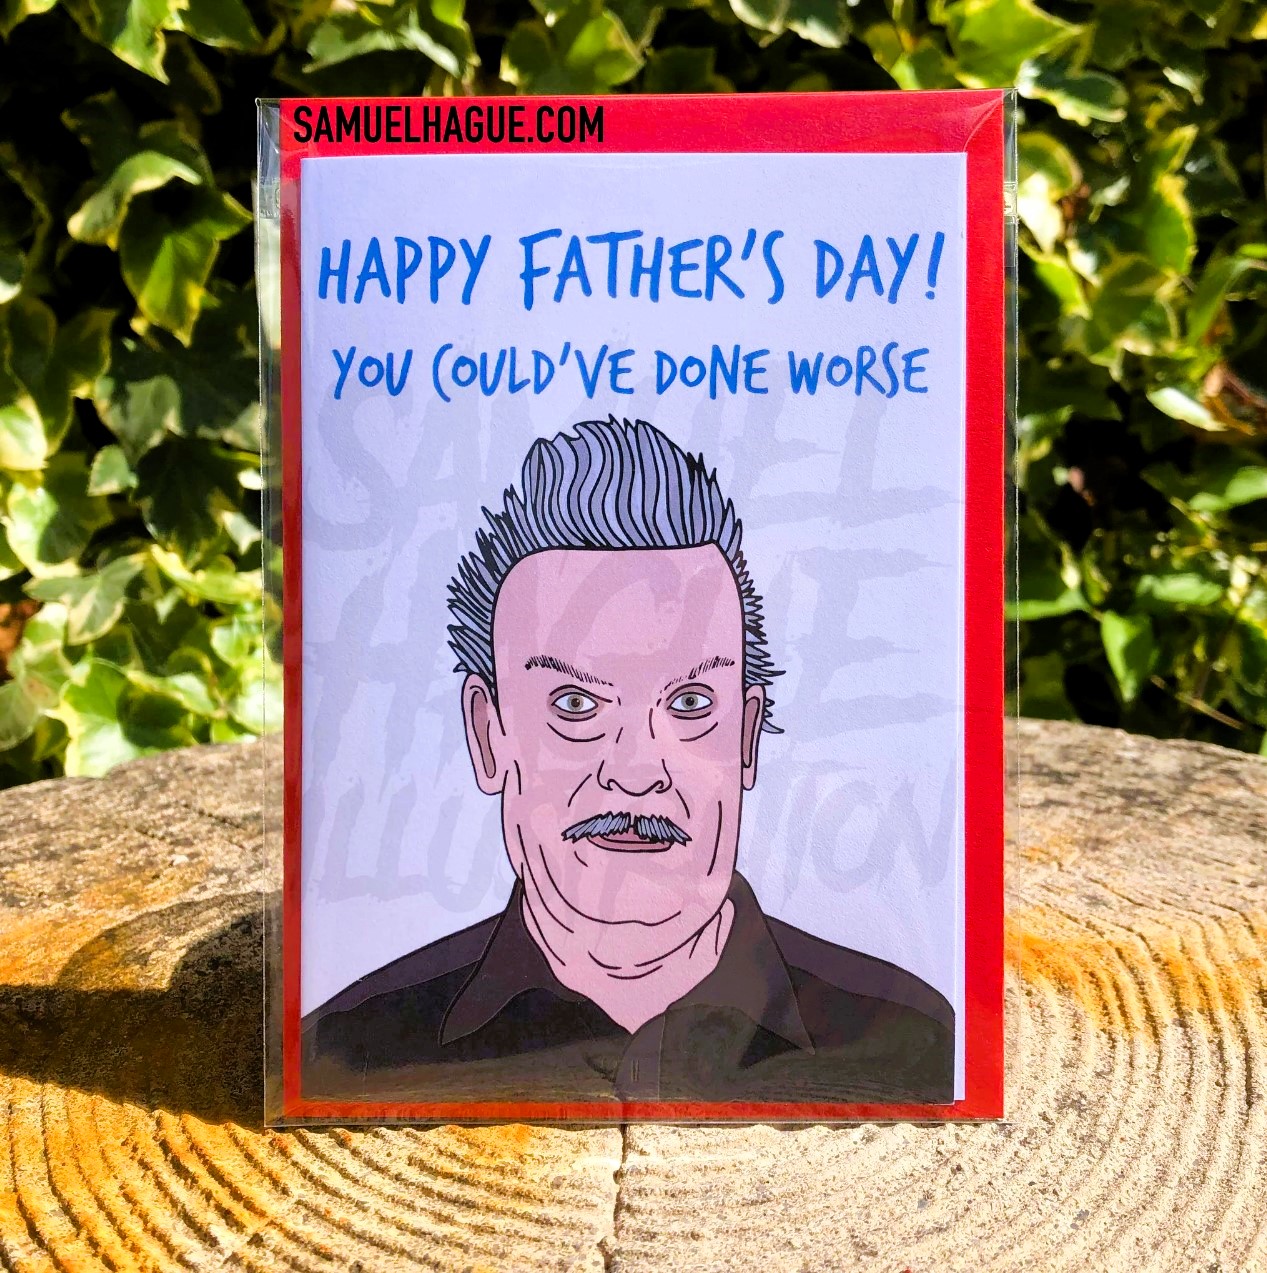 Shoppers criticize Father’s Day gifts featuring Josef Fritzl, known for heinous crimes. Items include mugs and T-shirts with his face, raising ethical concerns.